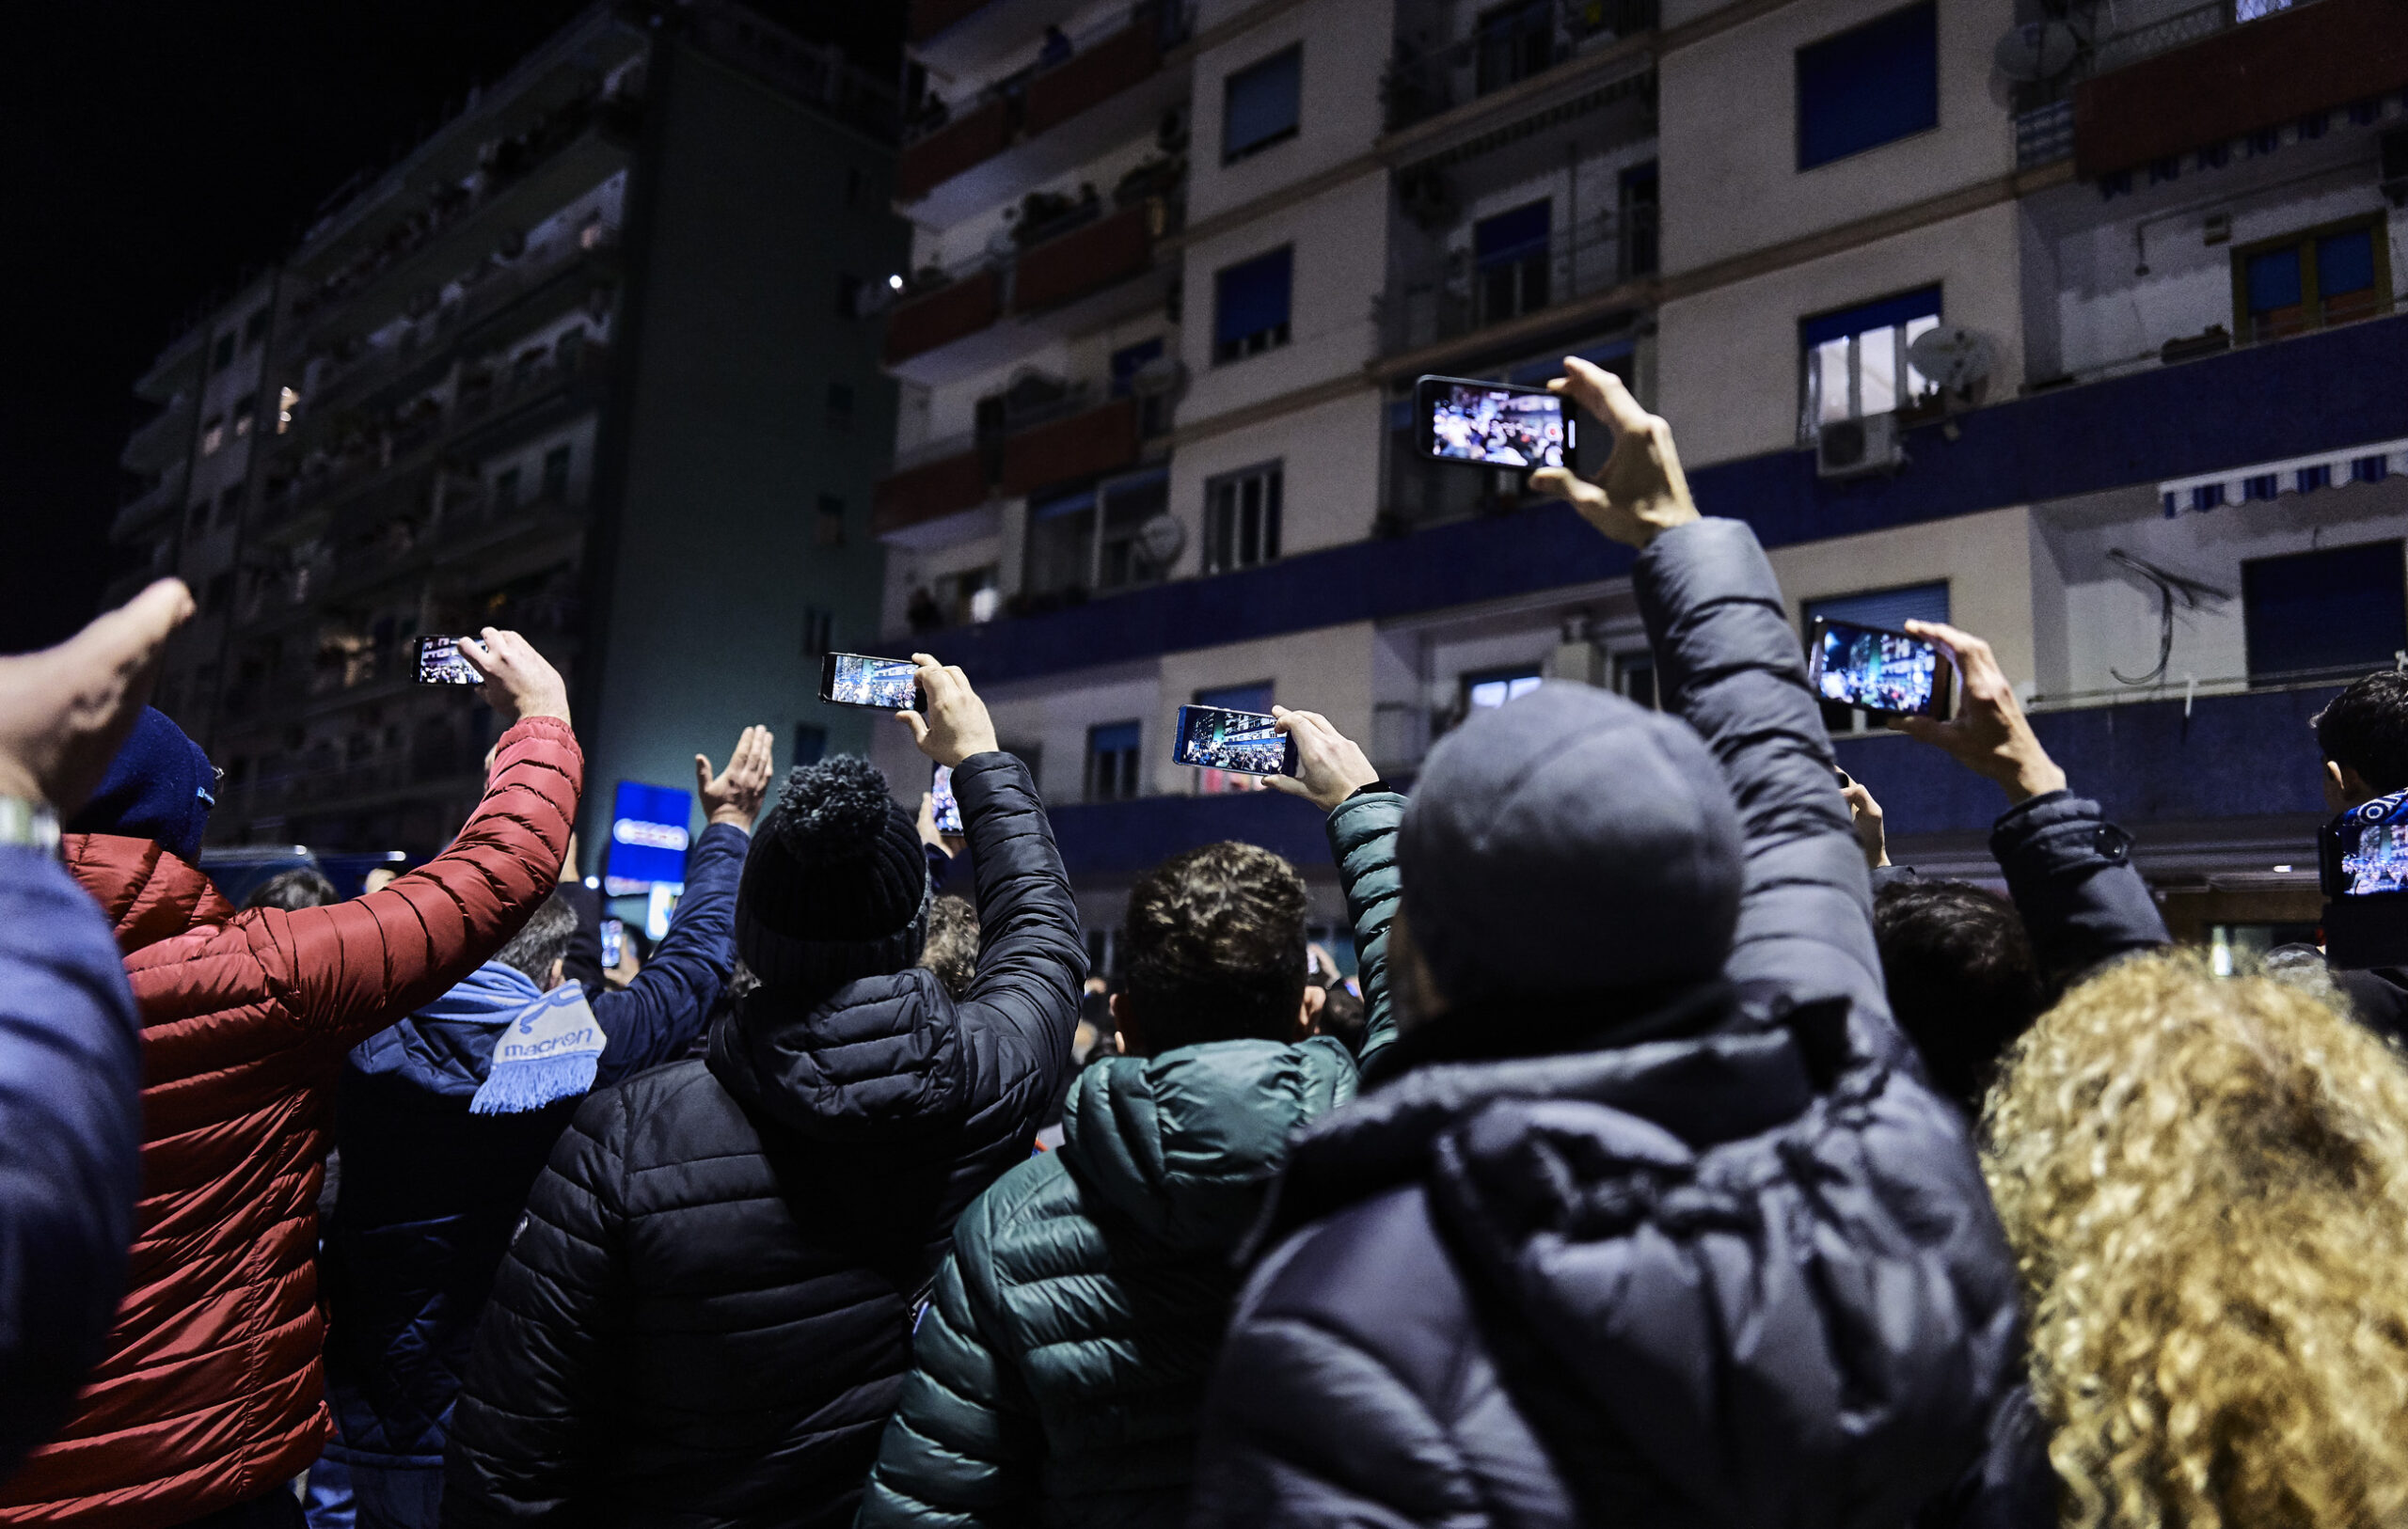 Supporters capturing the arrival at the stadium of Napoli players bus